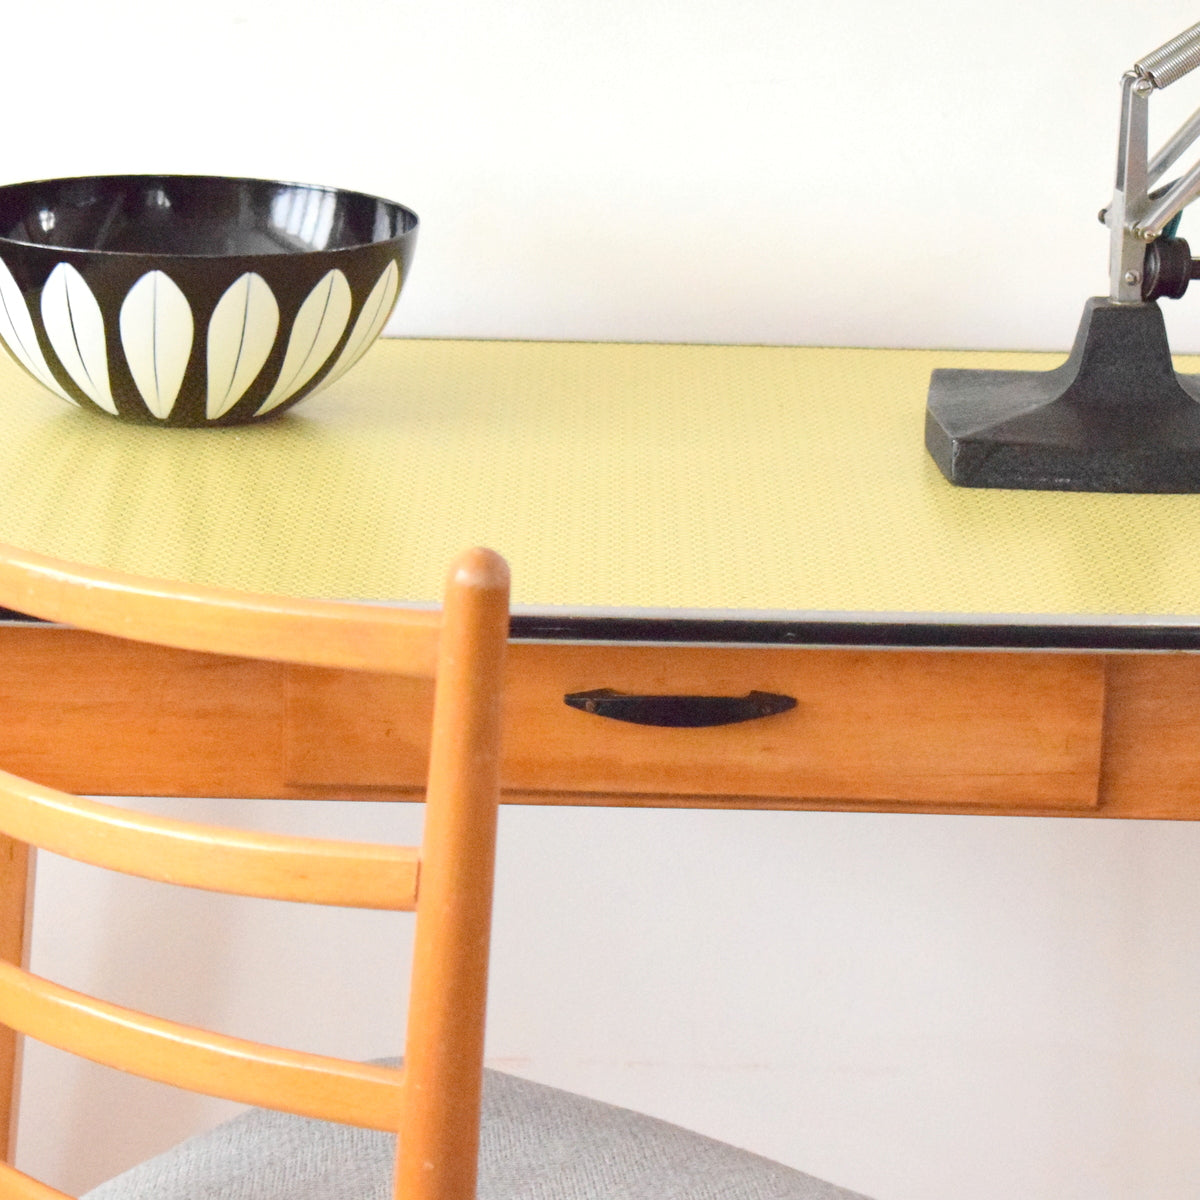 Vintage 1950s Formica Table - Fantastic Printed Formica - Ideal Desk, Yellow / Black & Chair